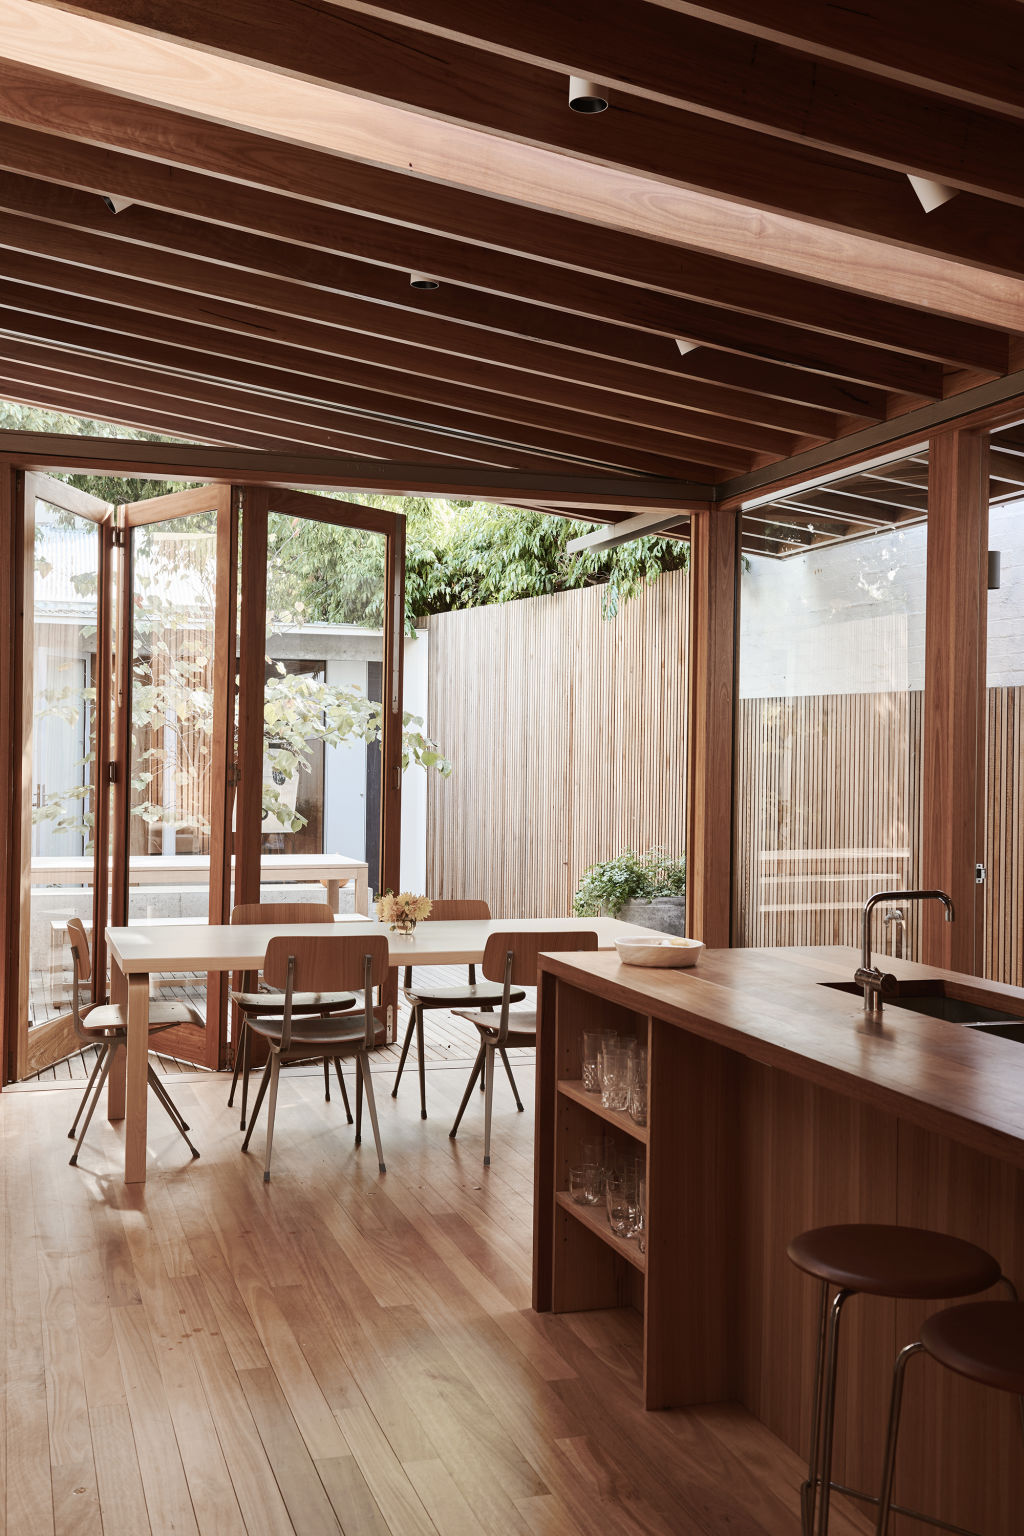 Customised timber joinery by Carpentry by Stu. Styling: Annie Portelli. Photo: Eve Wilson